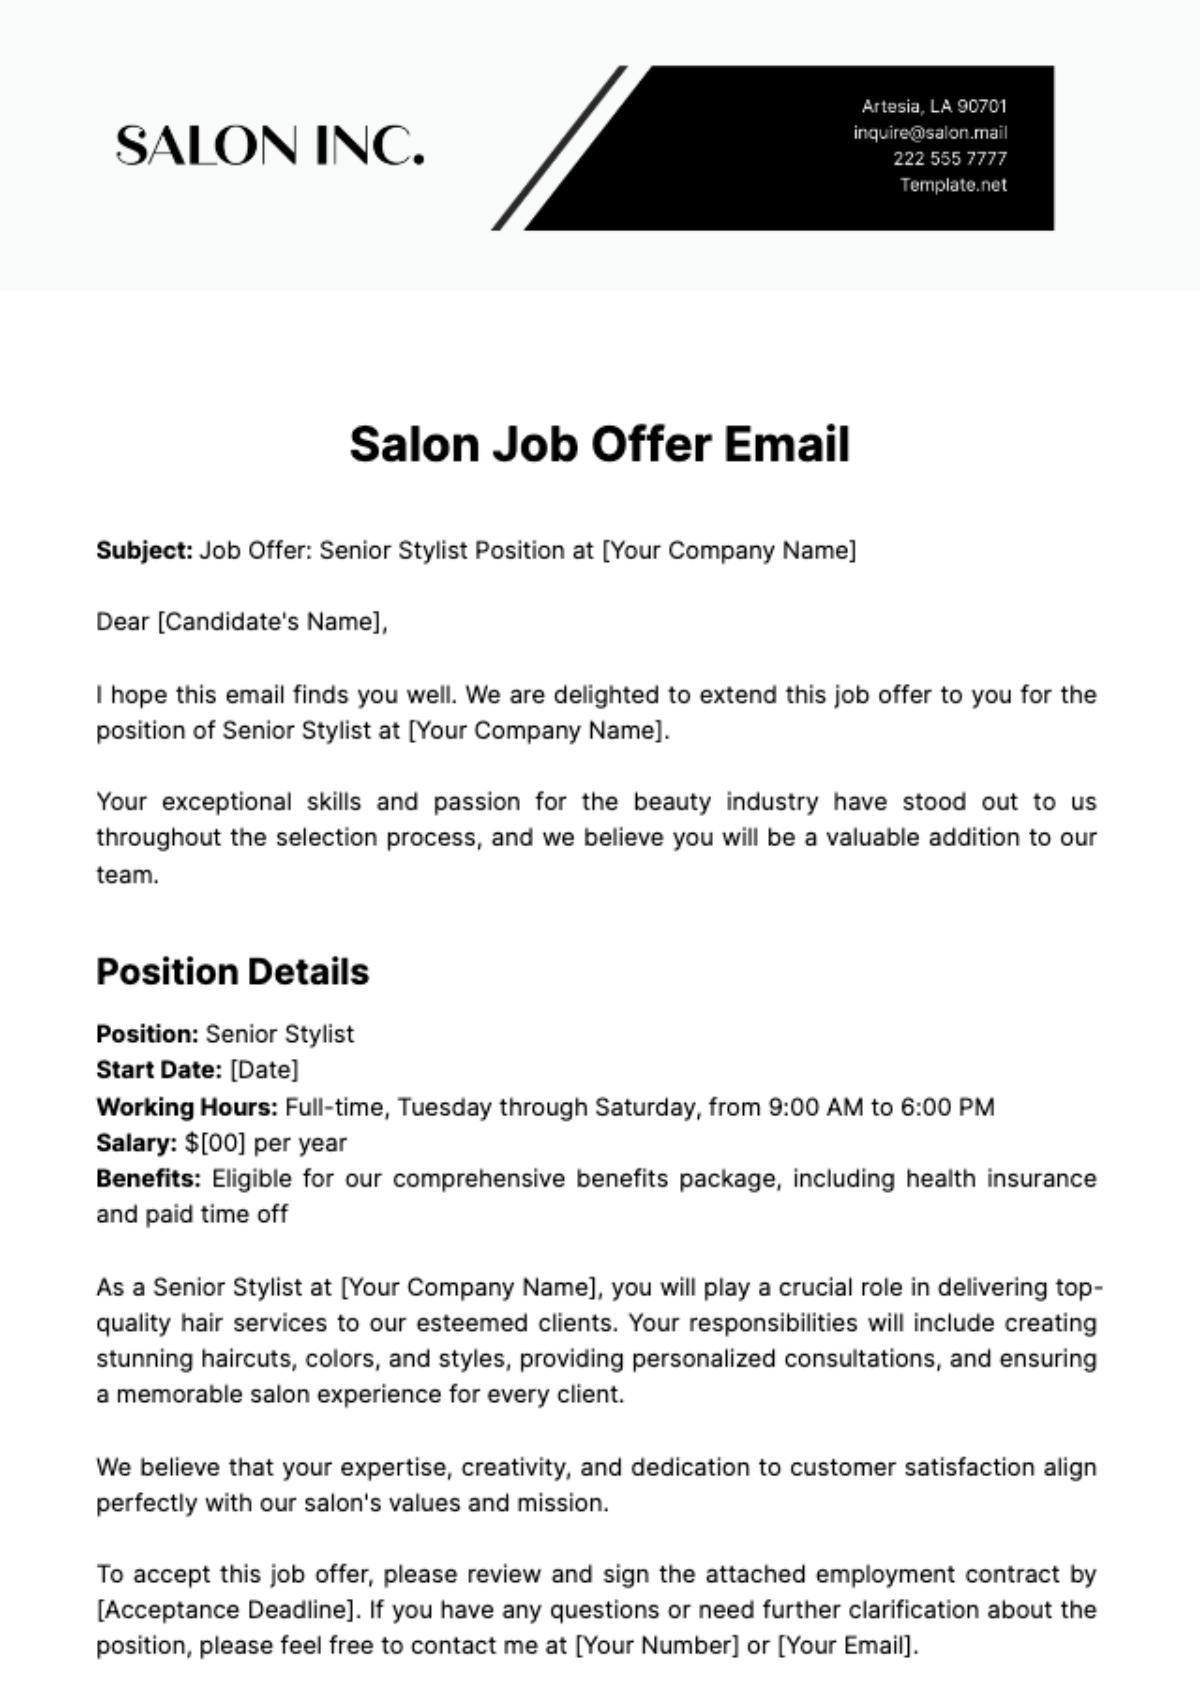 Free Salon Job Offer Email Template